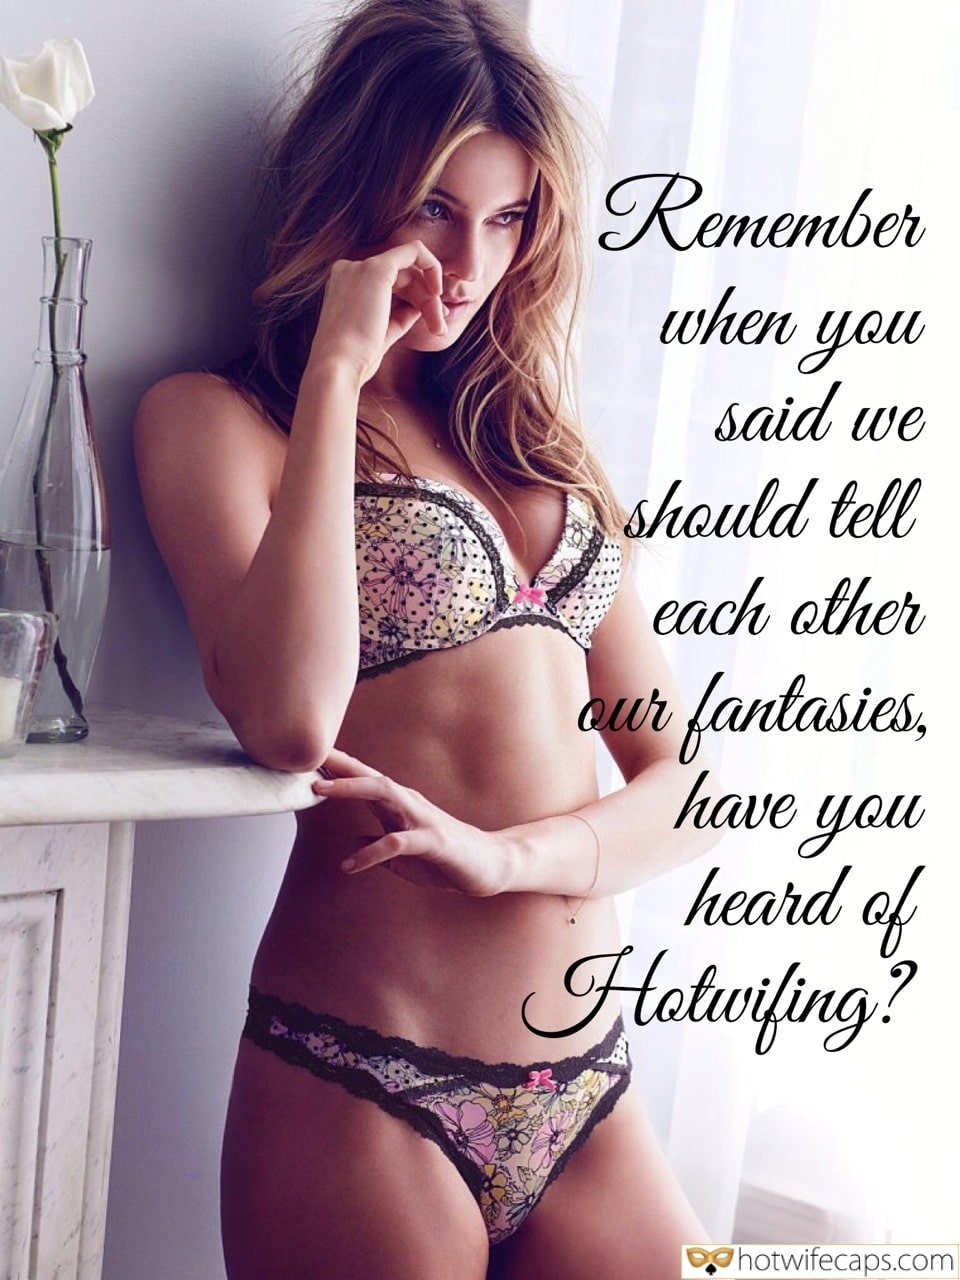 Wife Sharing Sexy Memes Cuckold Cleanup hotwife caption: Remember when you said we should tell each other our fantasies, have you heard of Hotwifing? Beautiful Brunette Hot Wife